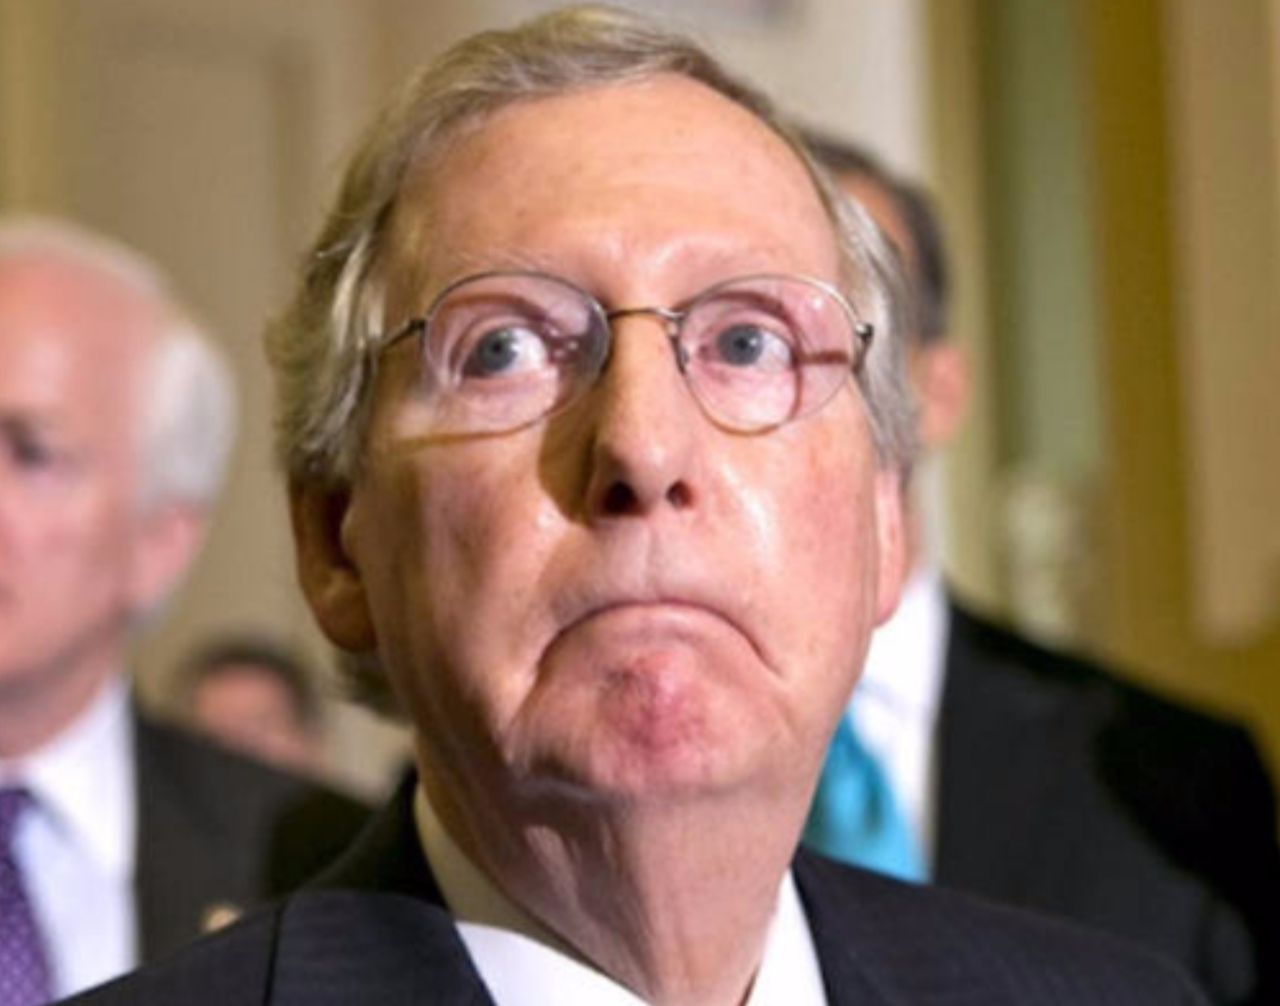 Tell Mitch McConnell he is responsible for the reparations his family owes!